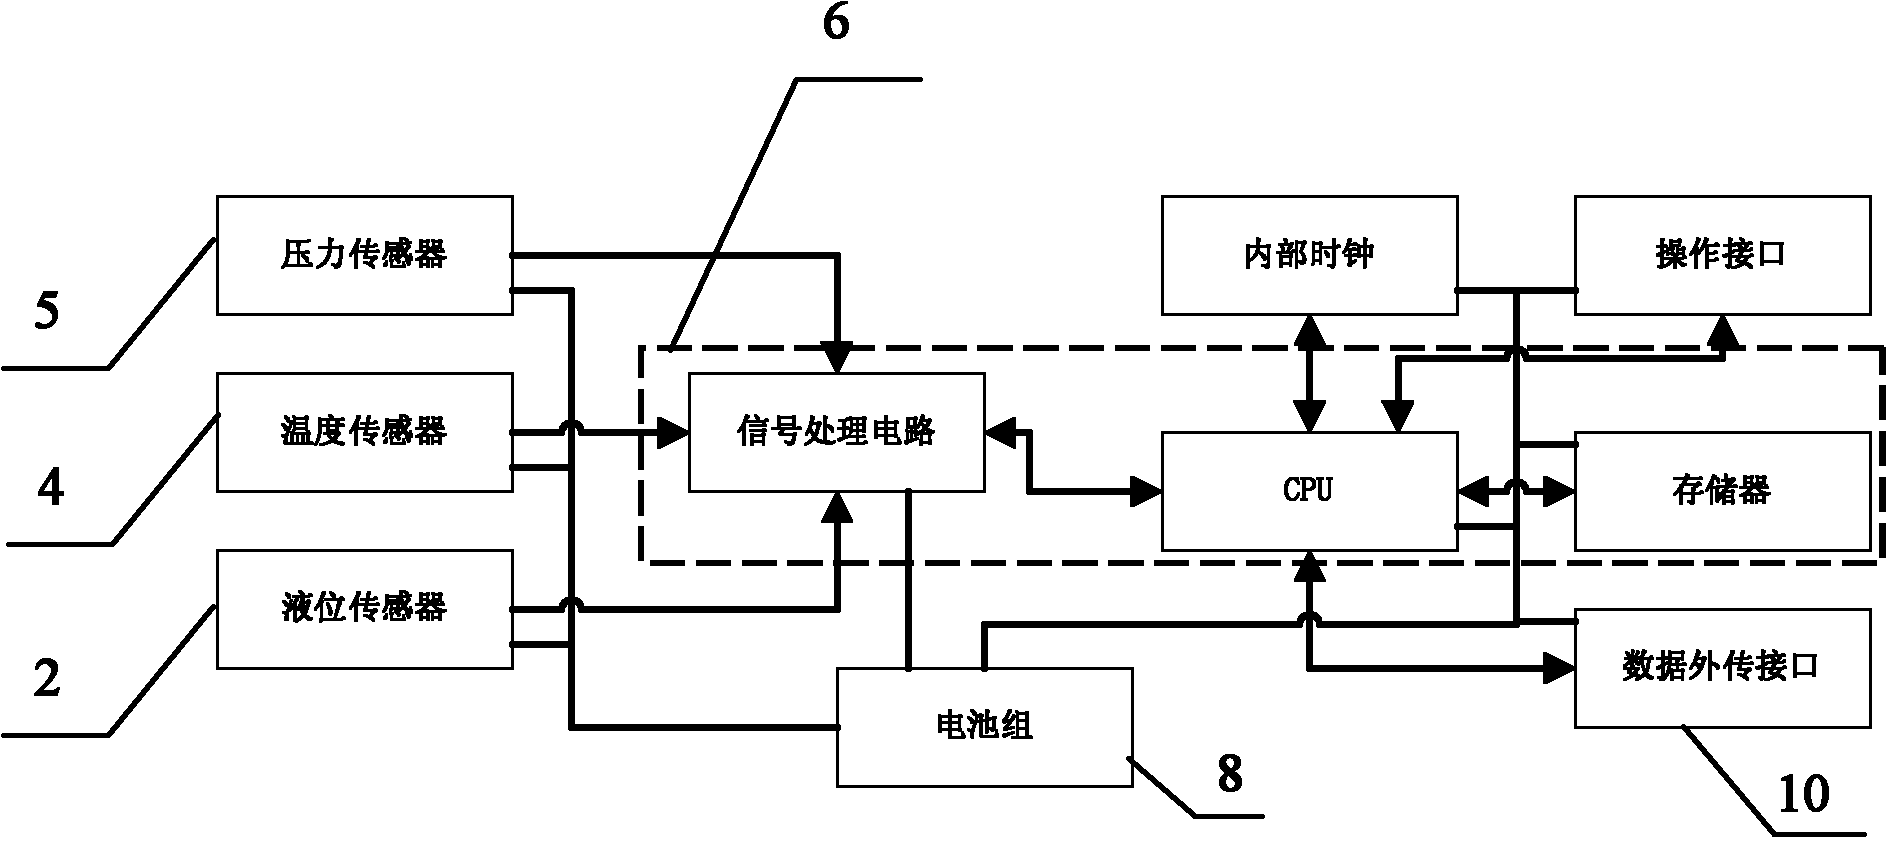 Measuring method and electronic measuring device for oil-water content in oil storage tank